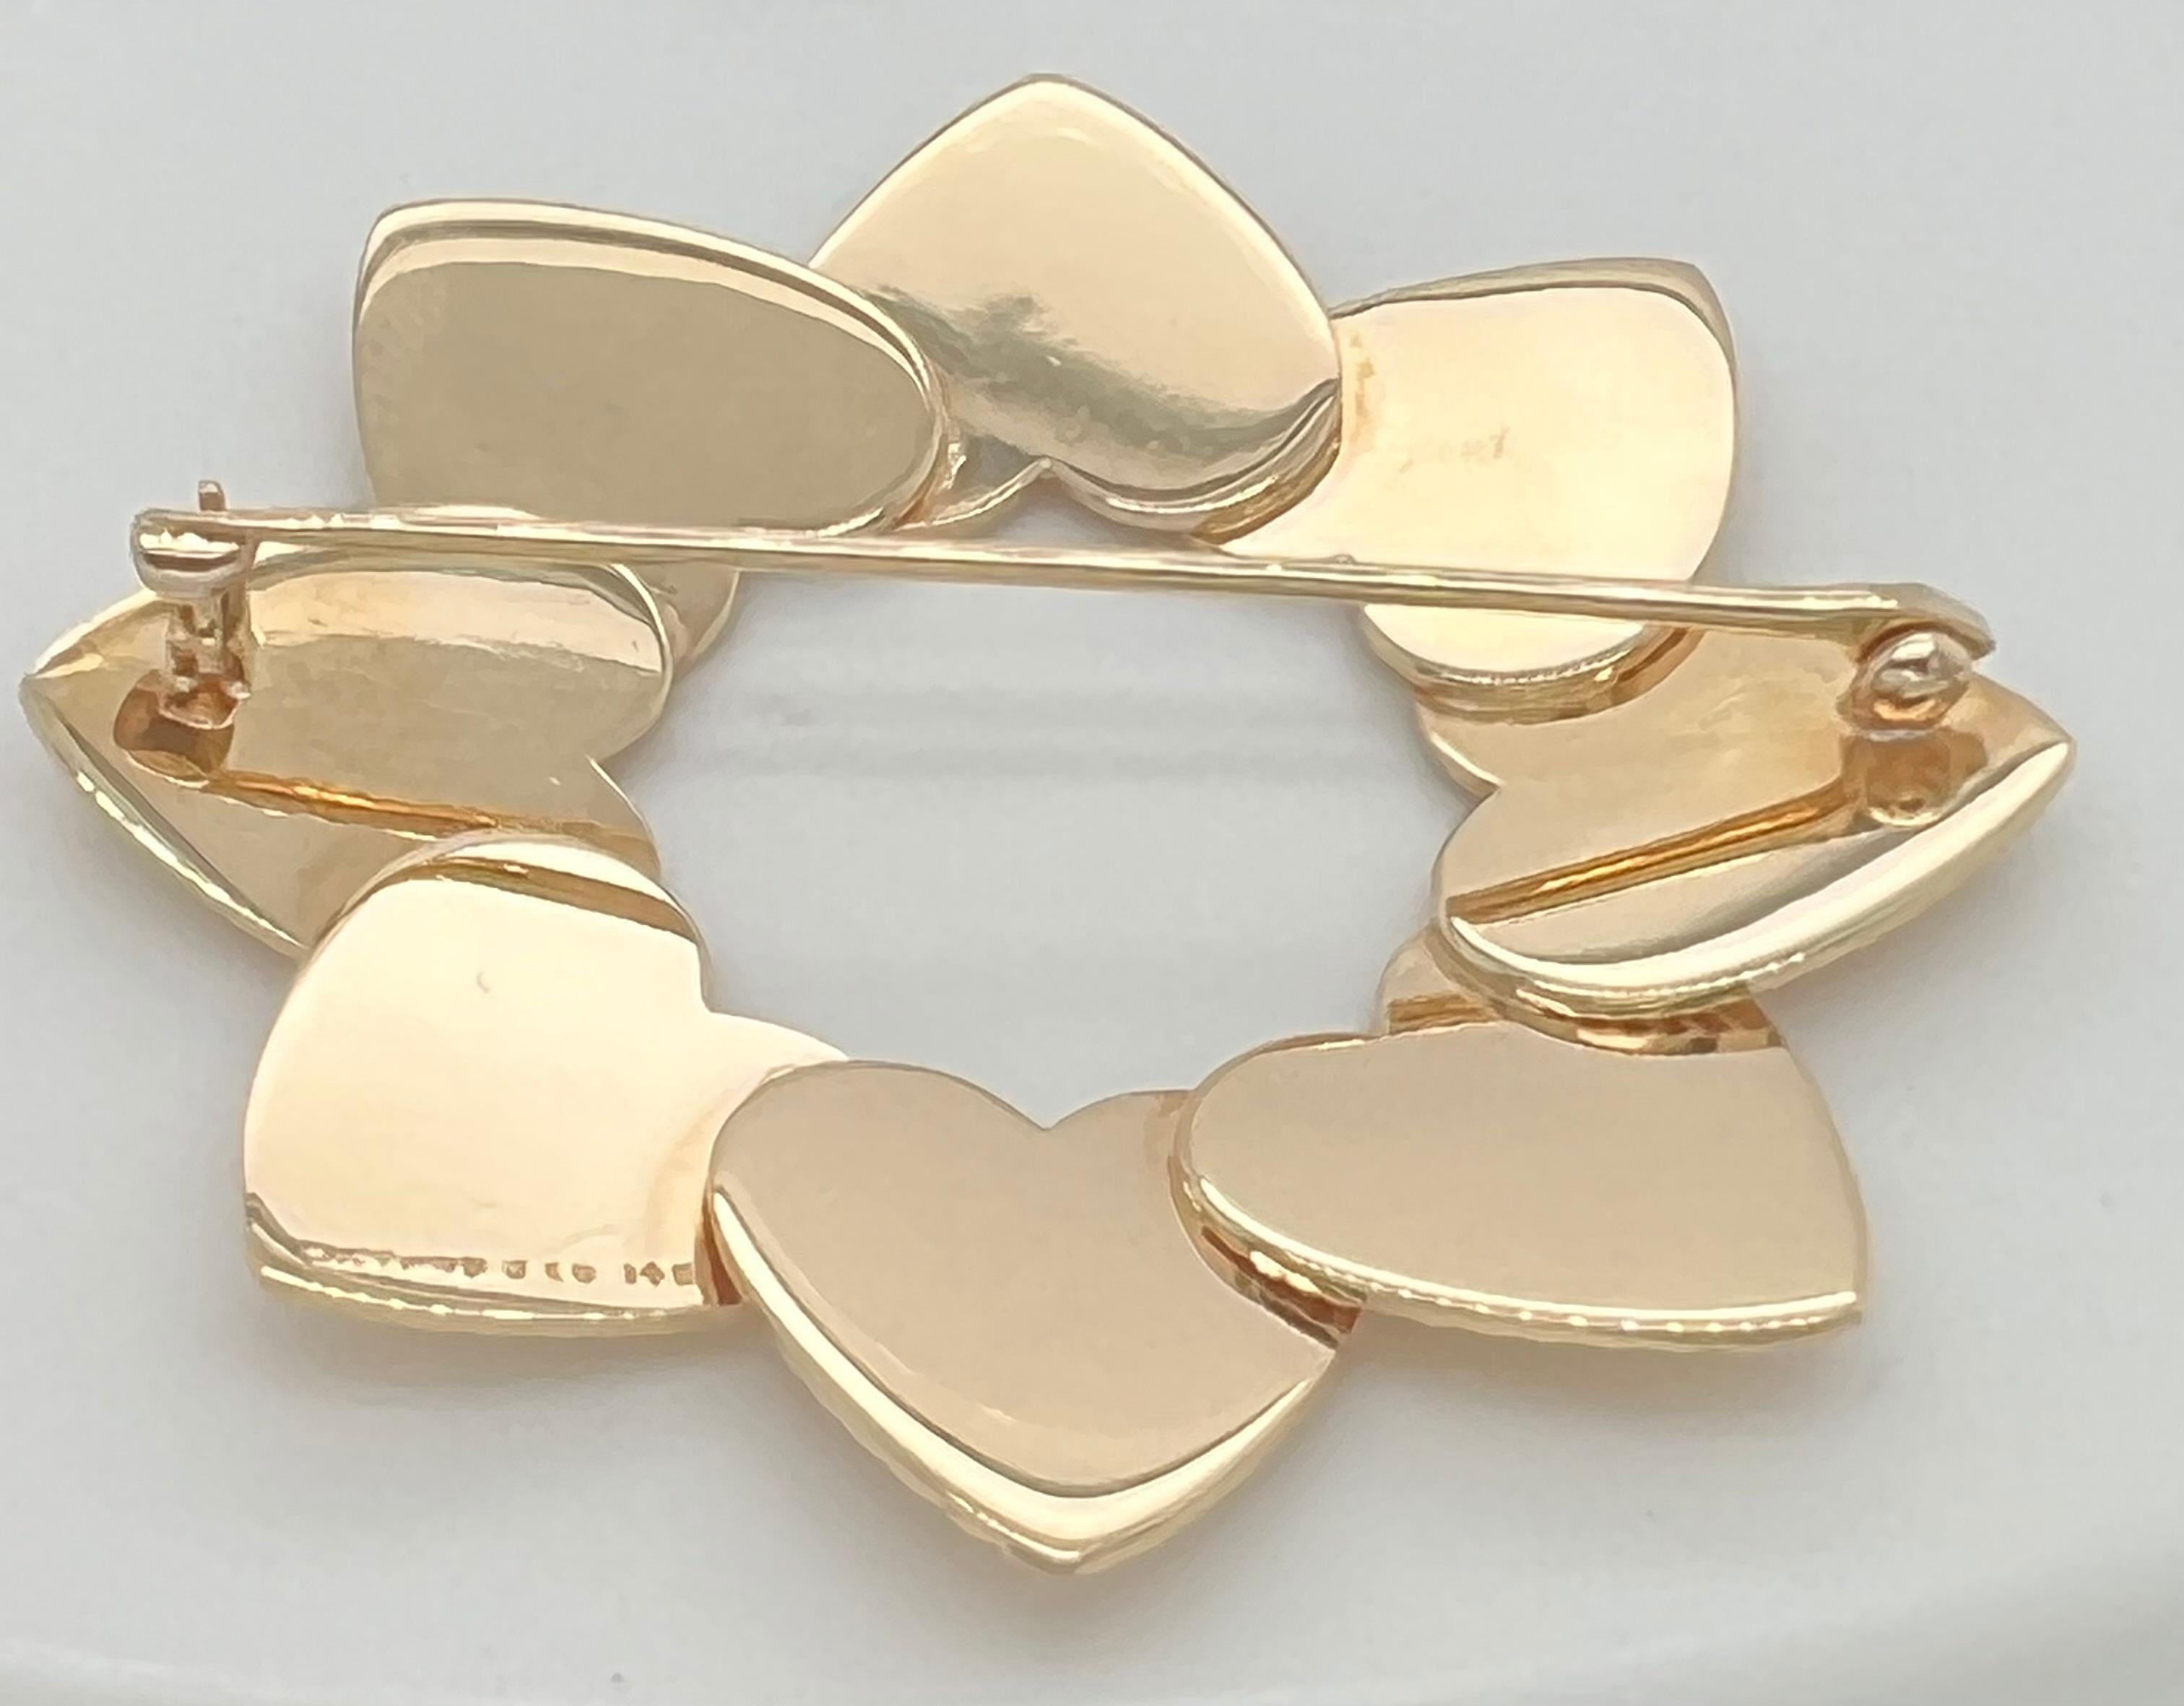 Chic retro heart pin.  Made and signed by TIFFANY & CO. Comprised of eight interlocking figural hearts, deeply engraved with a fine line pattern.  14K yellow gold.  1 3/4